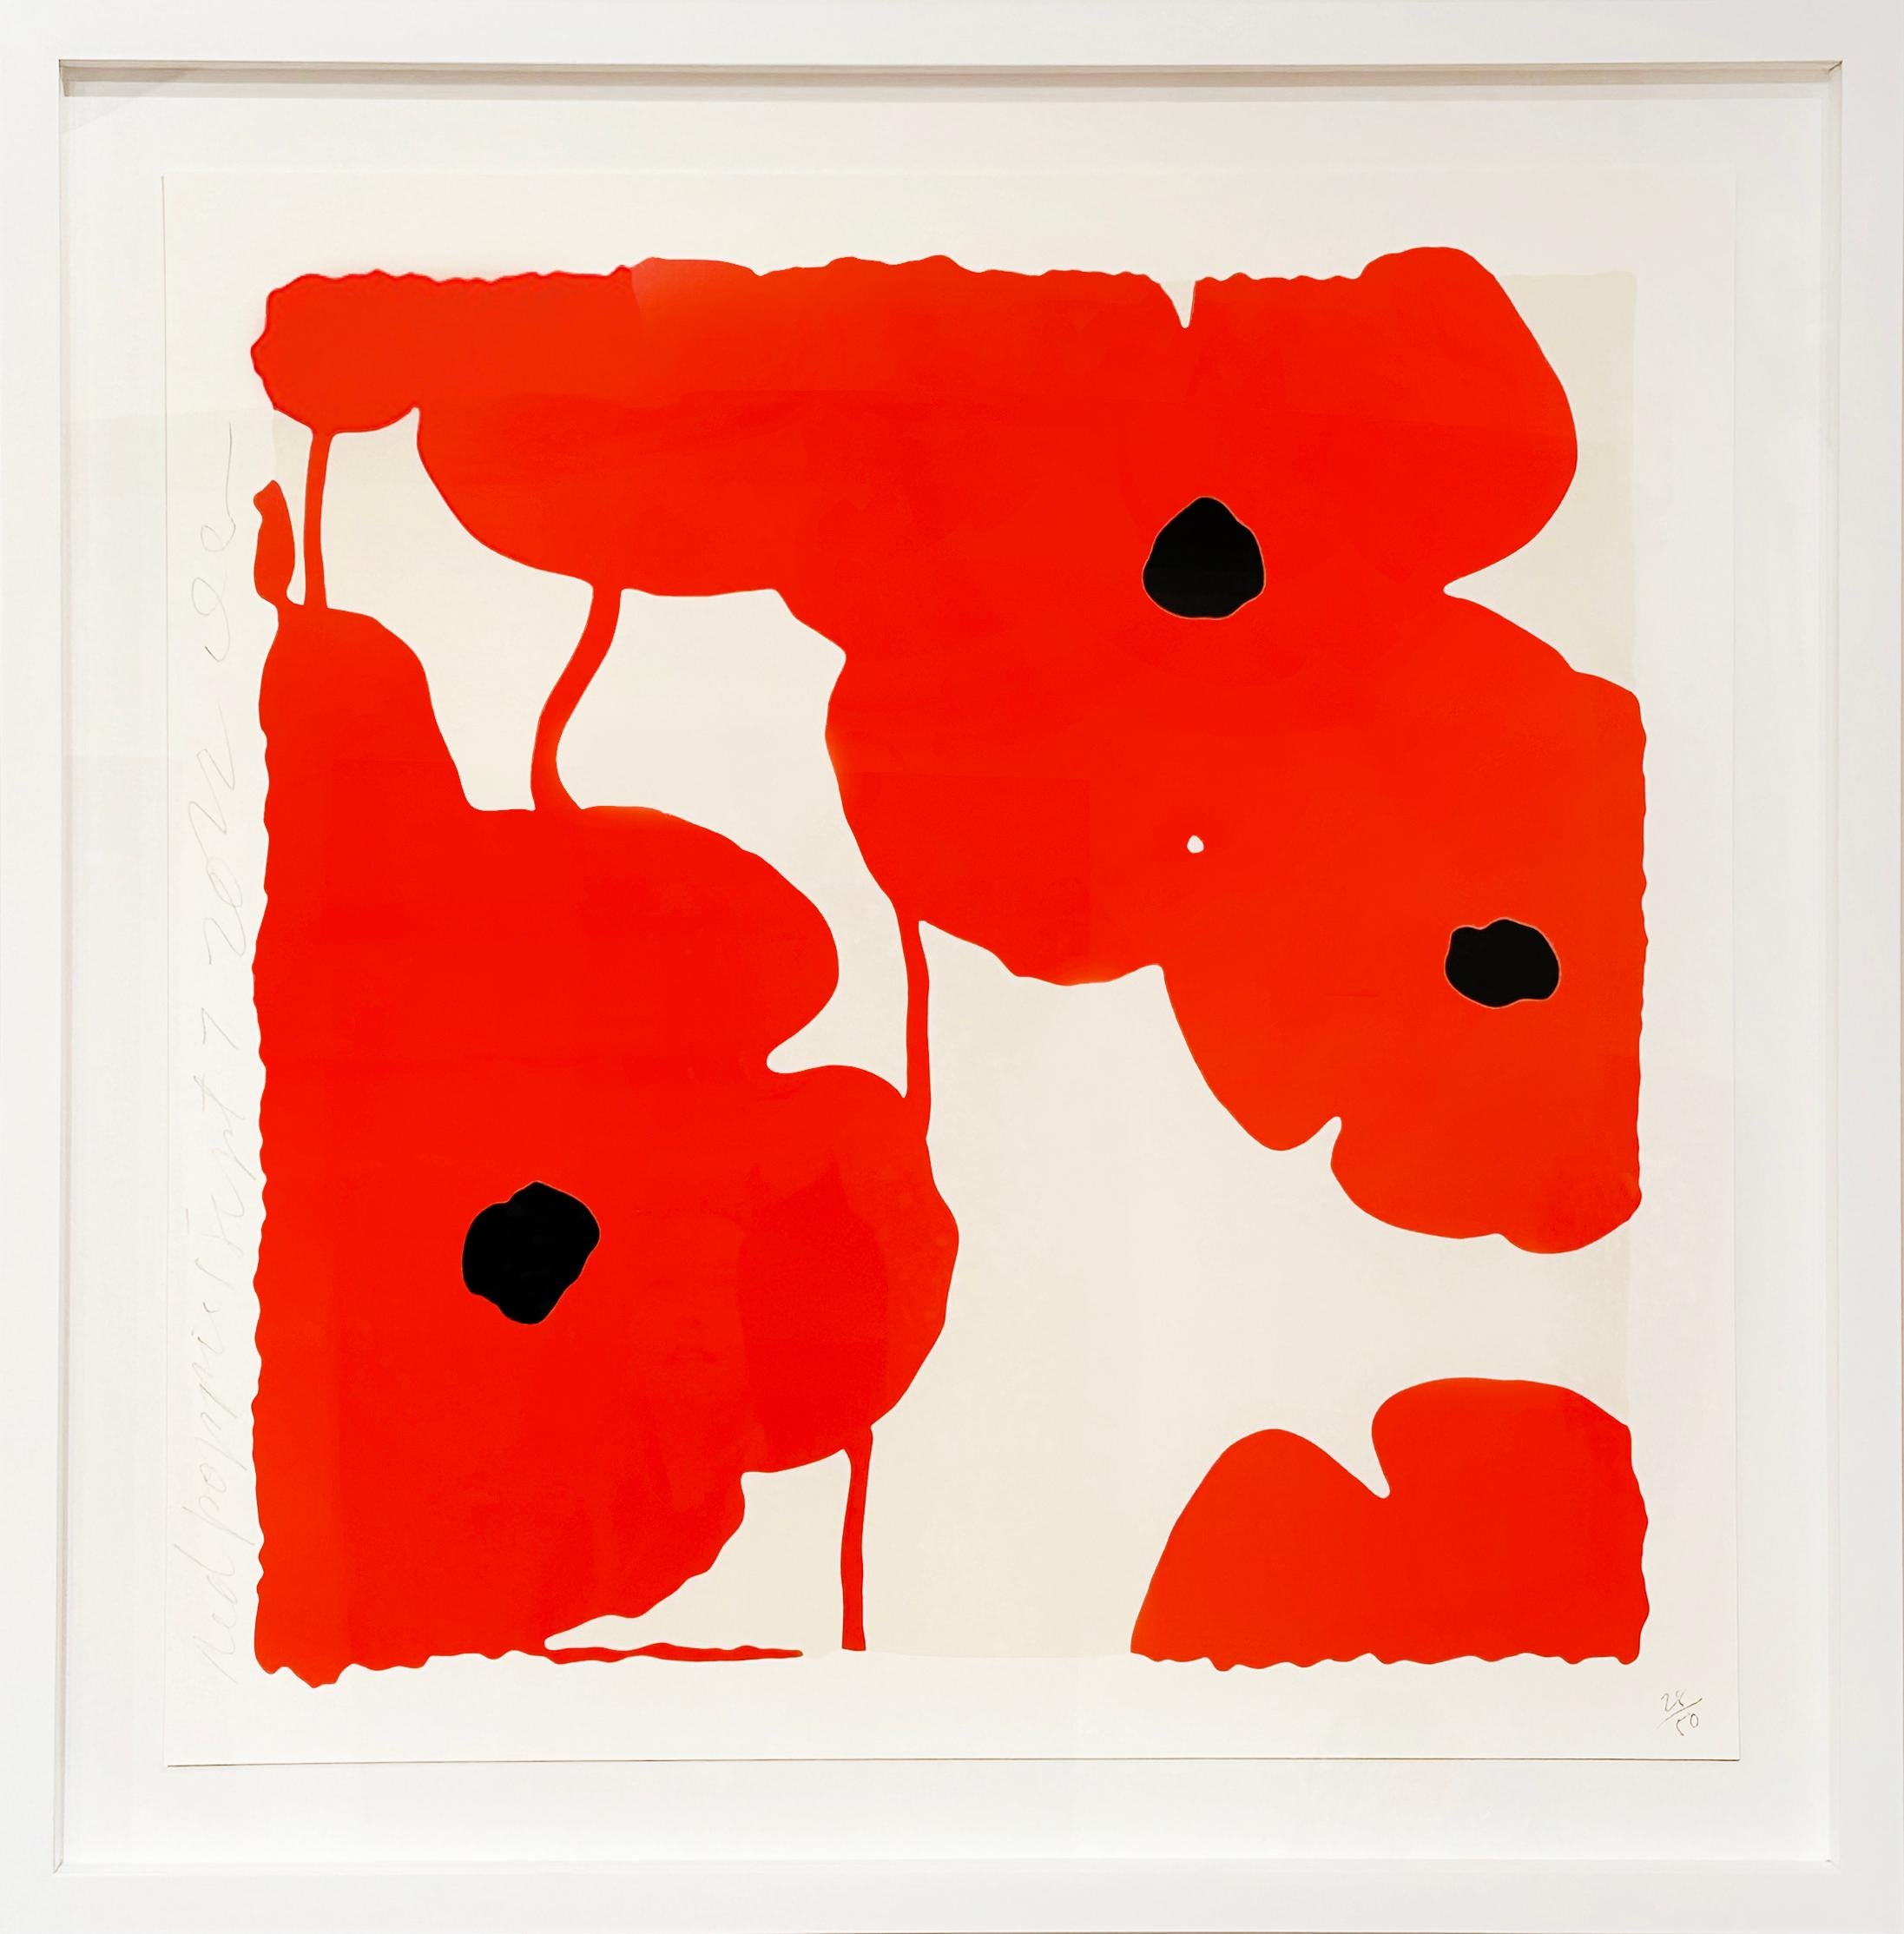 Red Poppies, Sept. 7, 2022 - Print by Donald Sultan